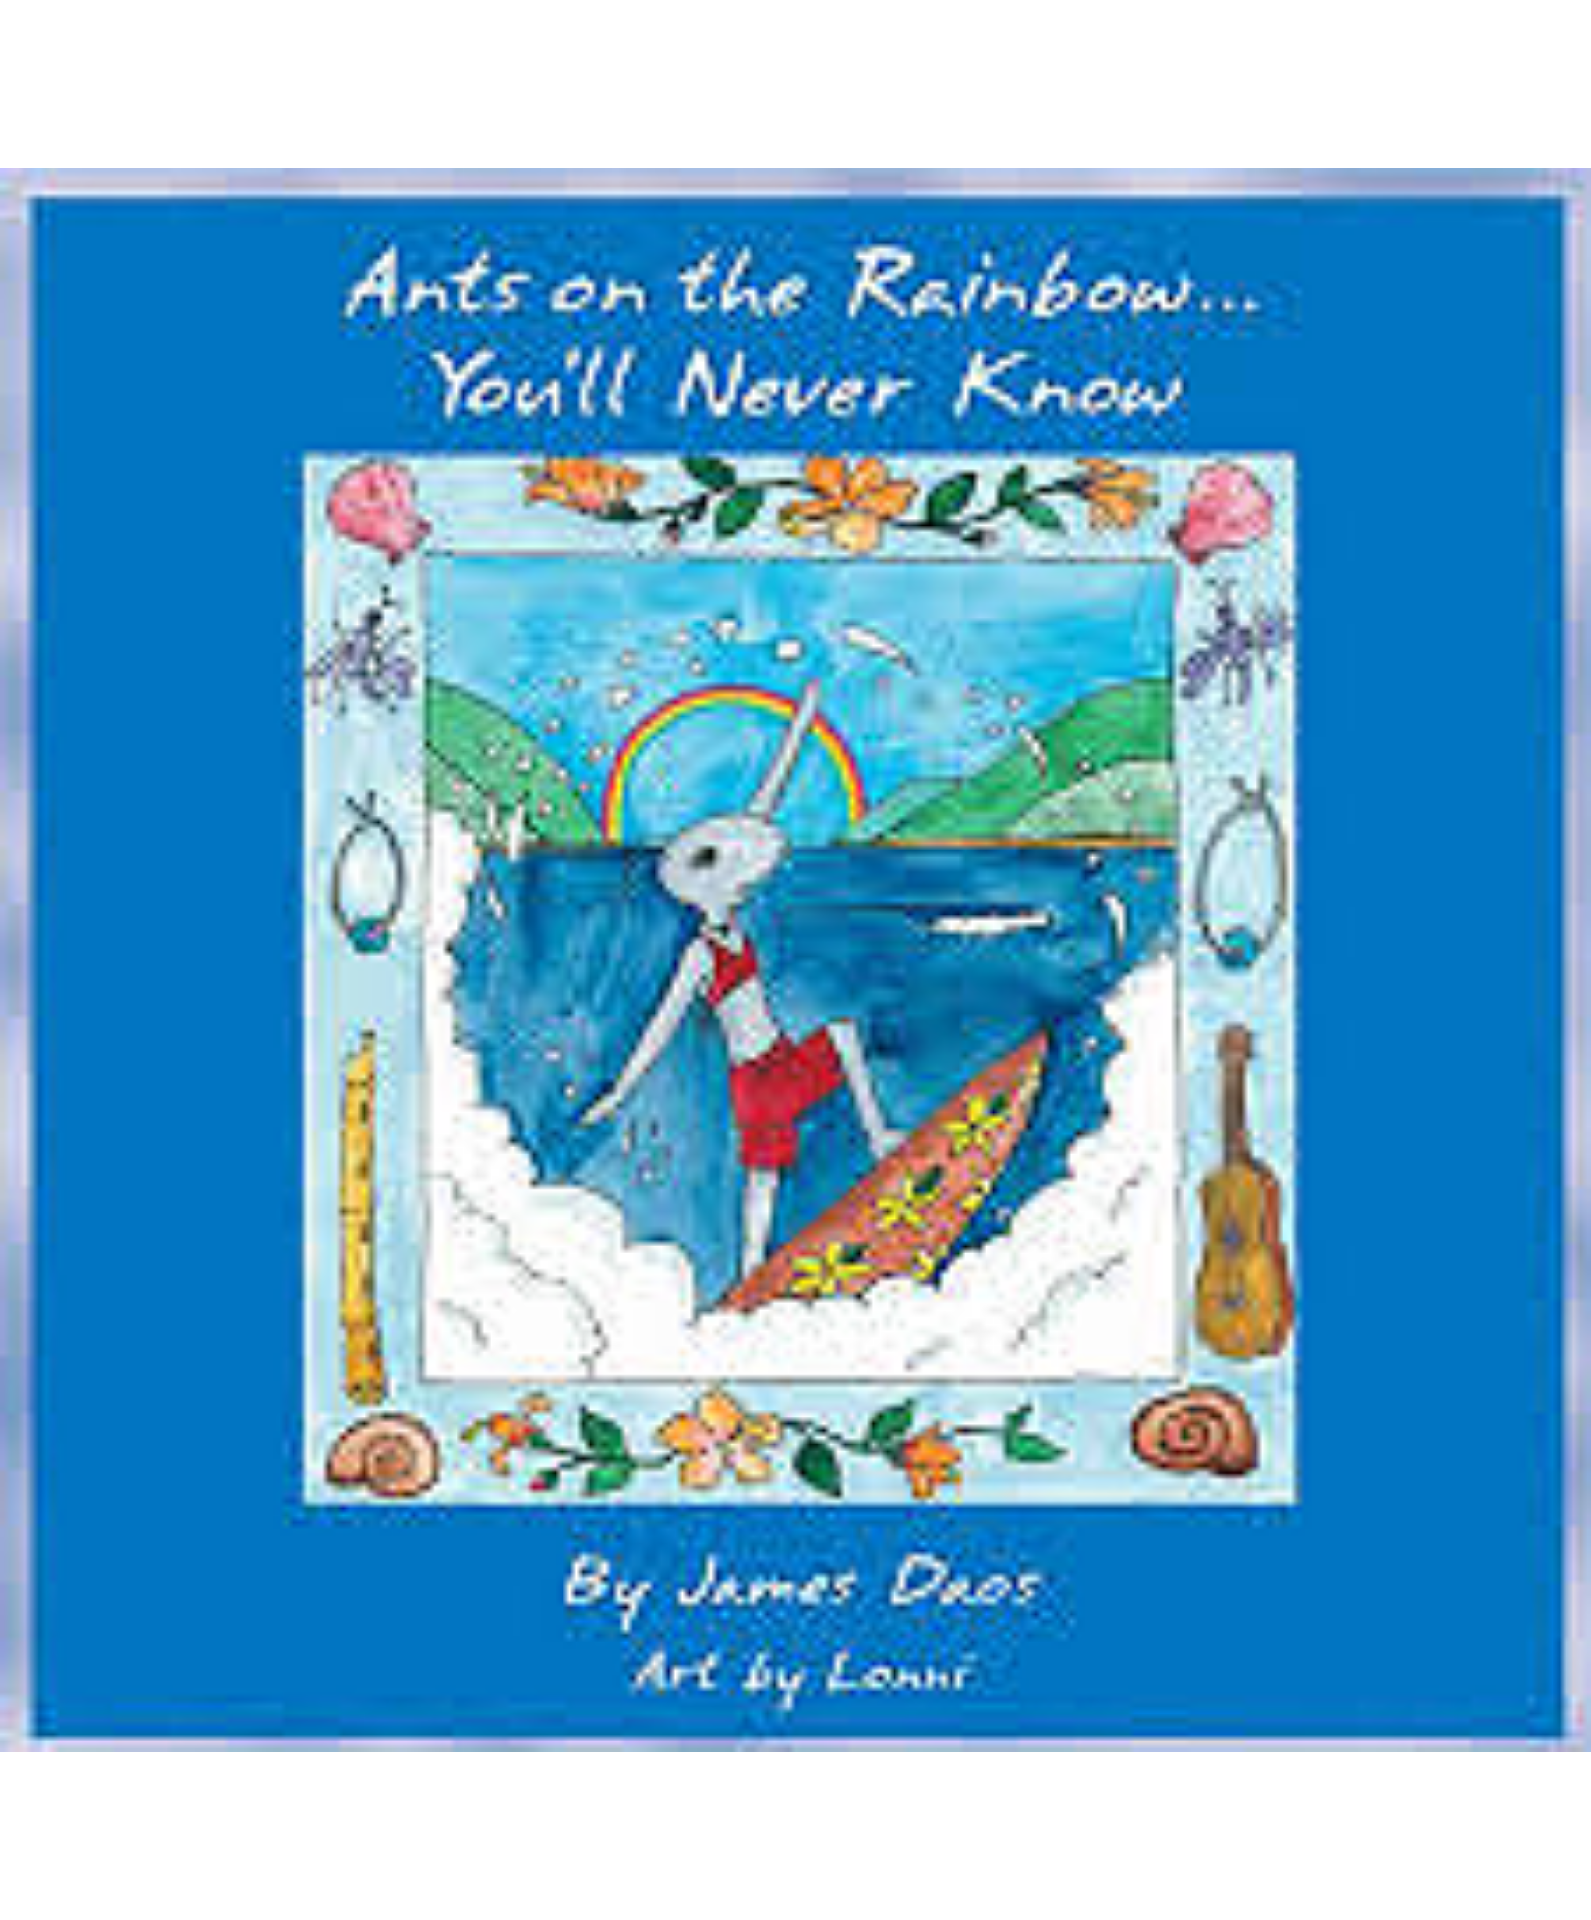 Ants On The Rainbow...You'll Never Know - Philippine Expressions Bookshop